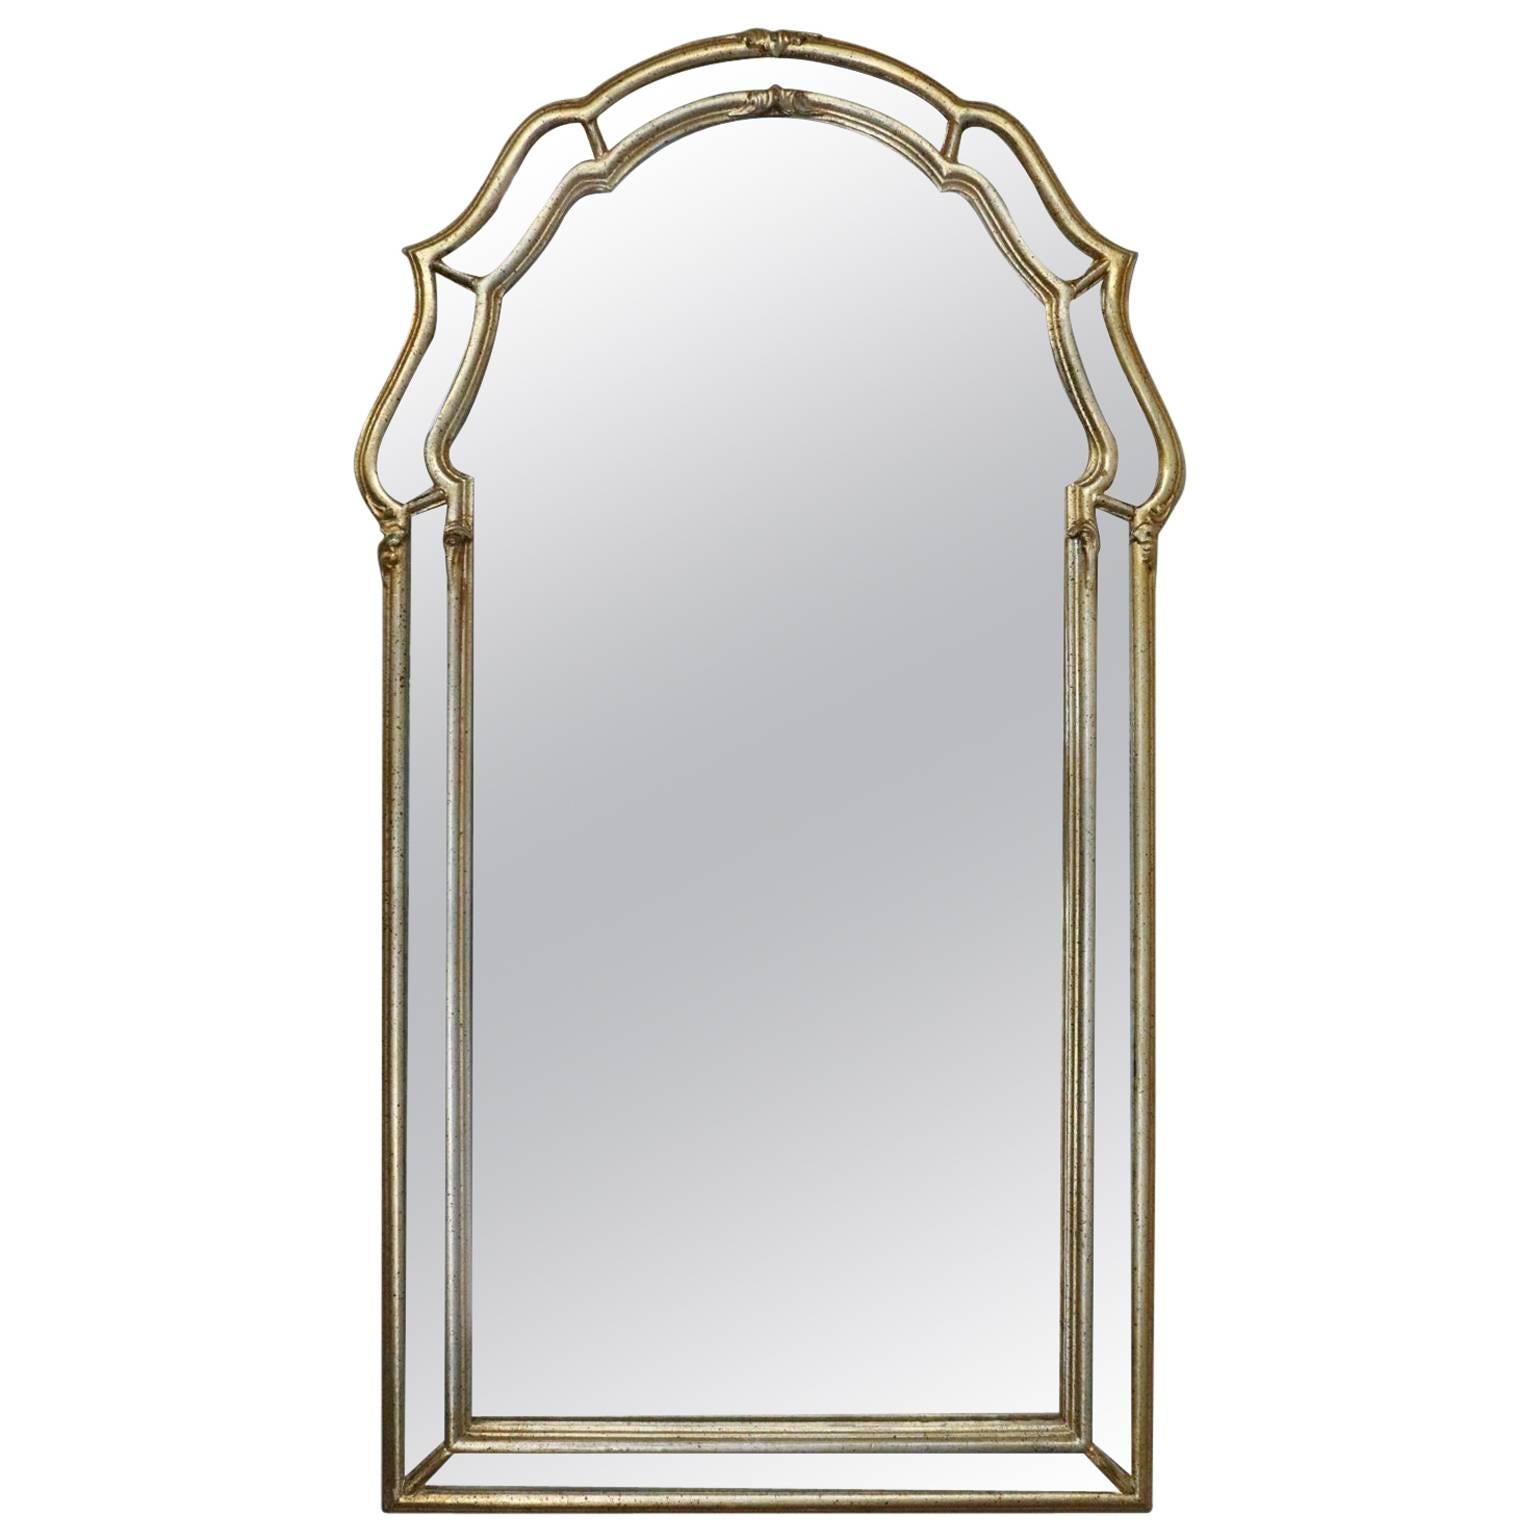 Vintage French Neoclassical Giltwood Parclose Wall Mirror, 20th Century